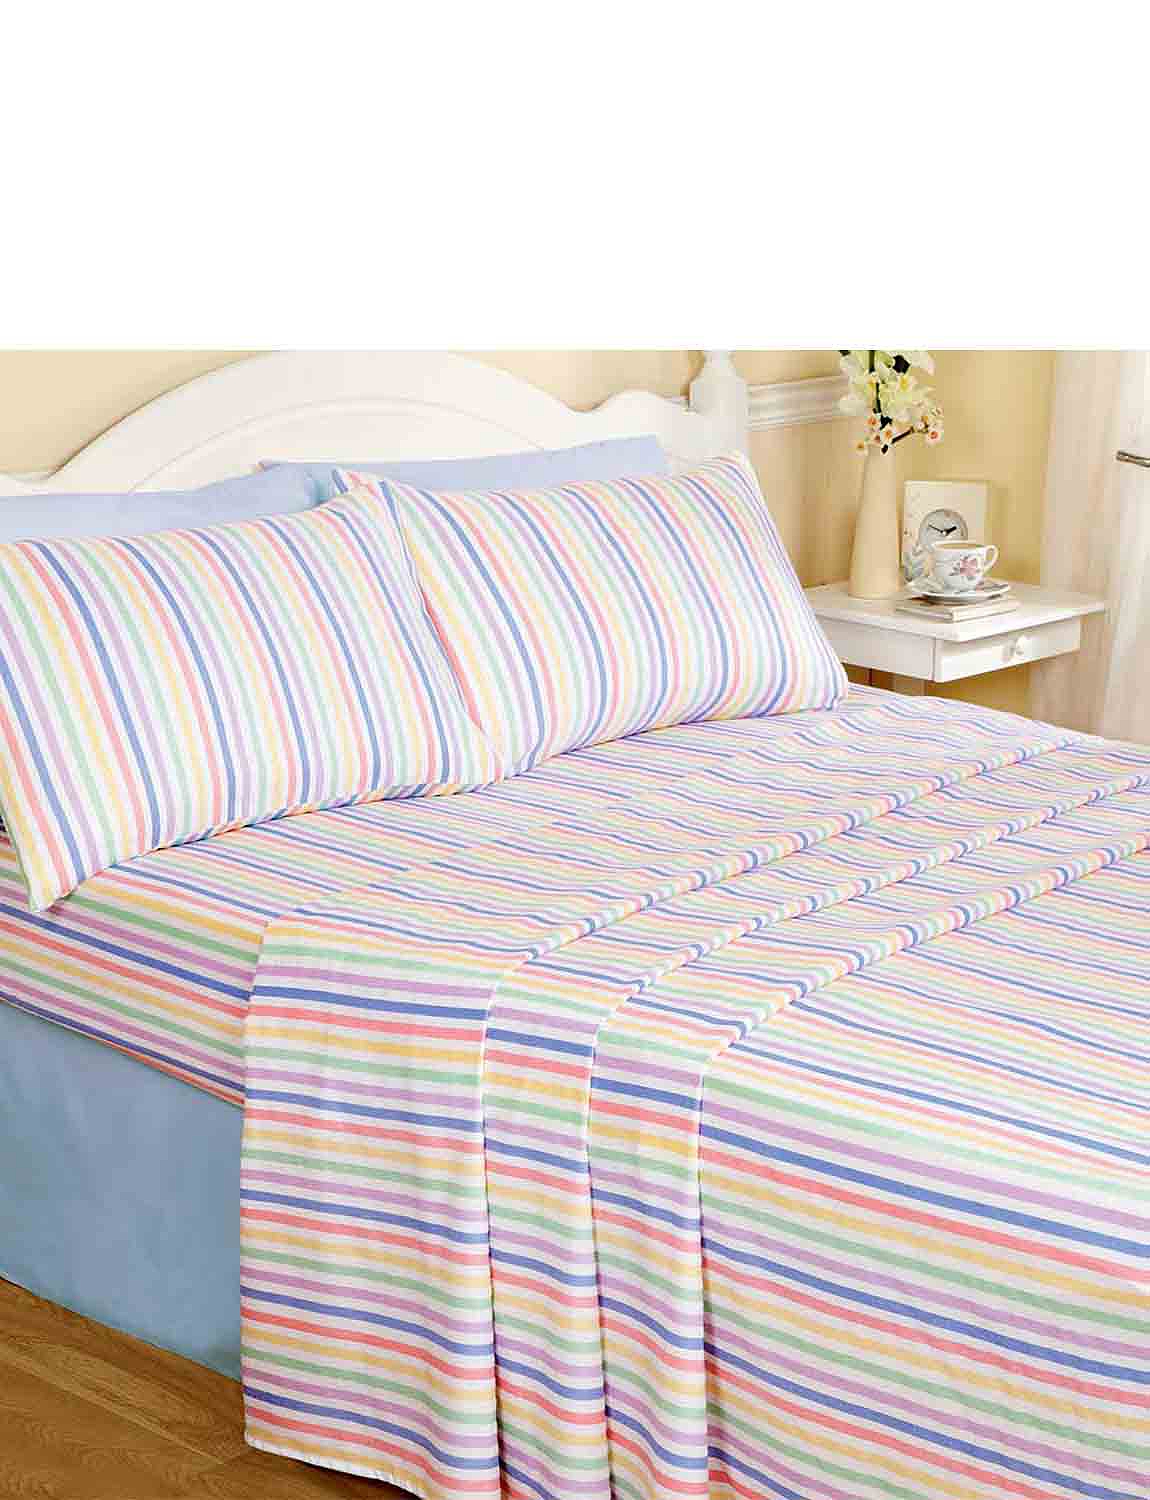 Pink Fitted Sheet,Flat Sheet & Pillow Cases Double Sunshine Comfort ® Luxury Heavy weight Brushed Cotton Flannelette Sheet Sets